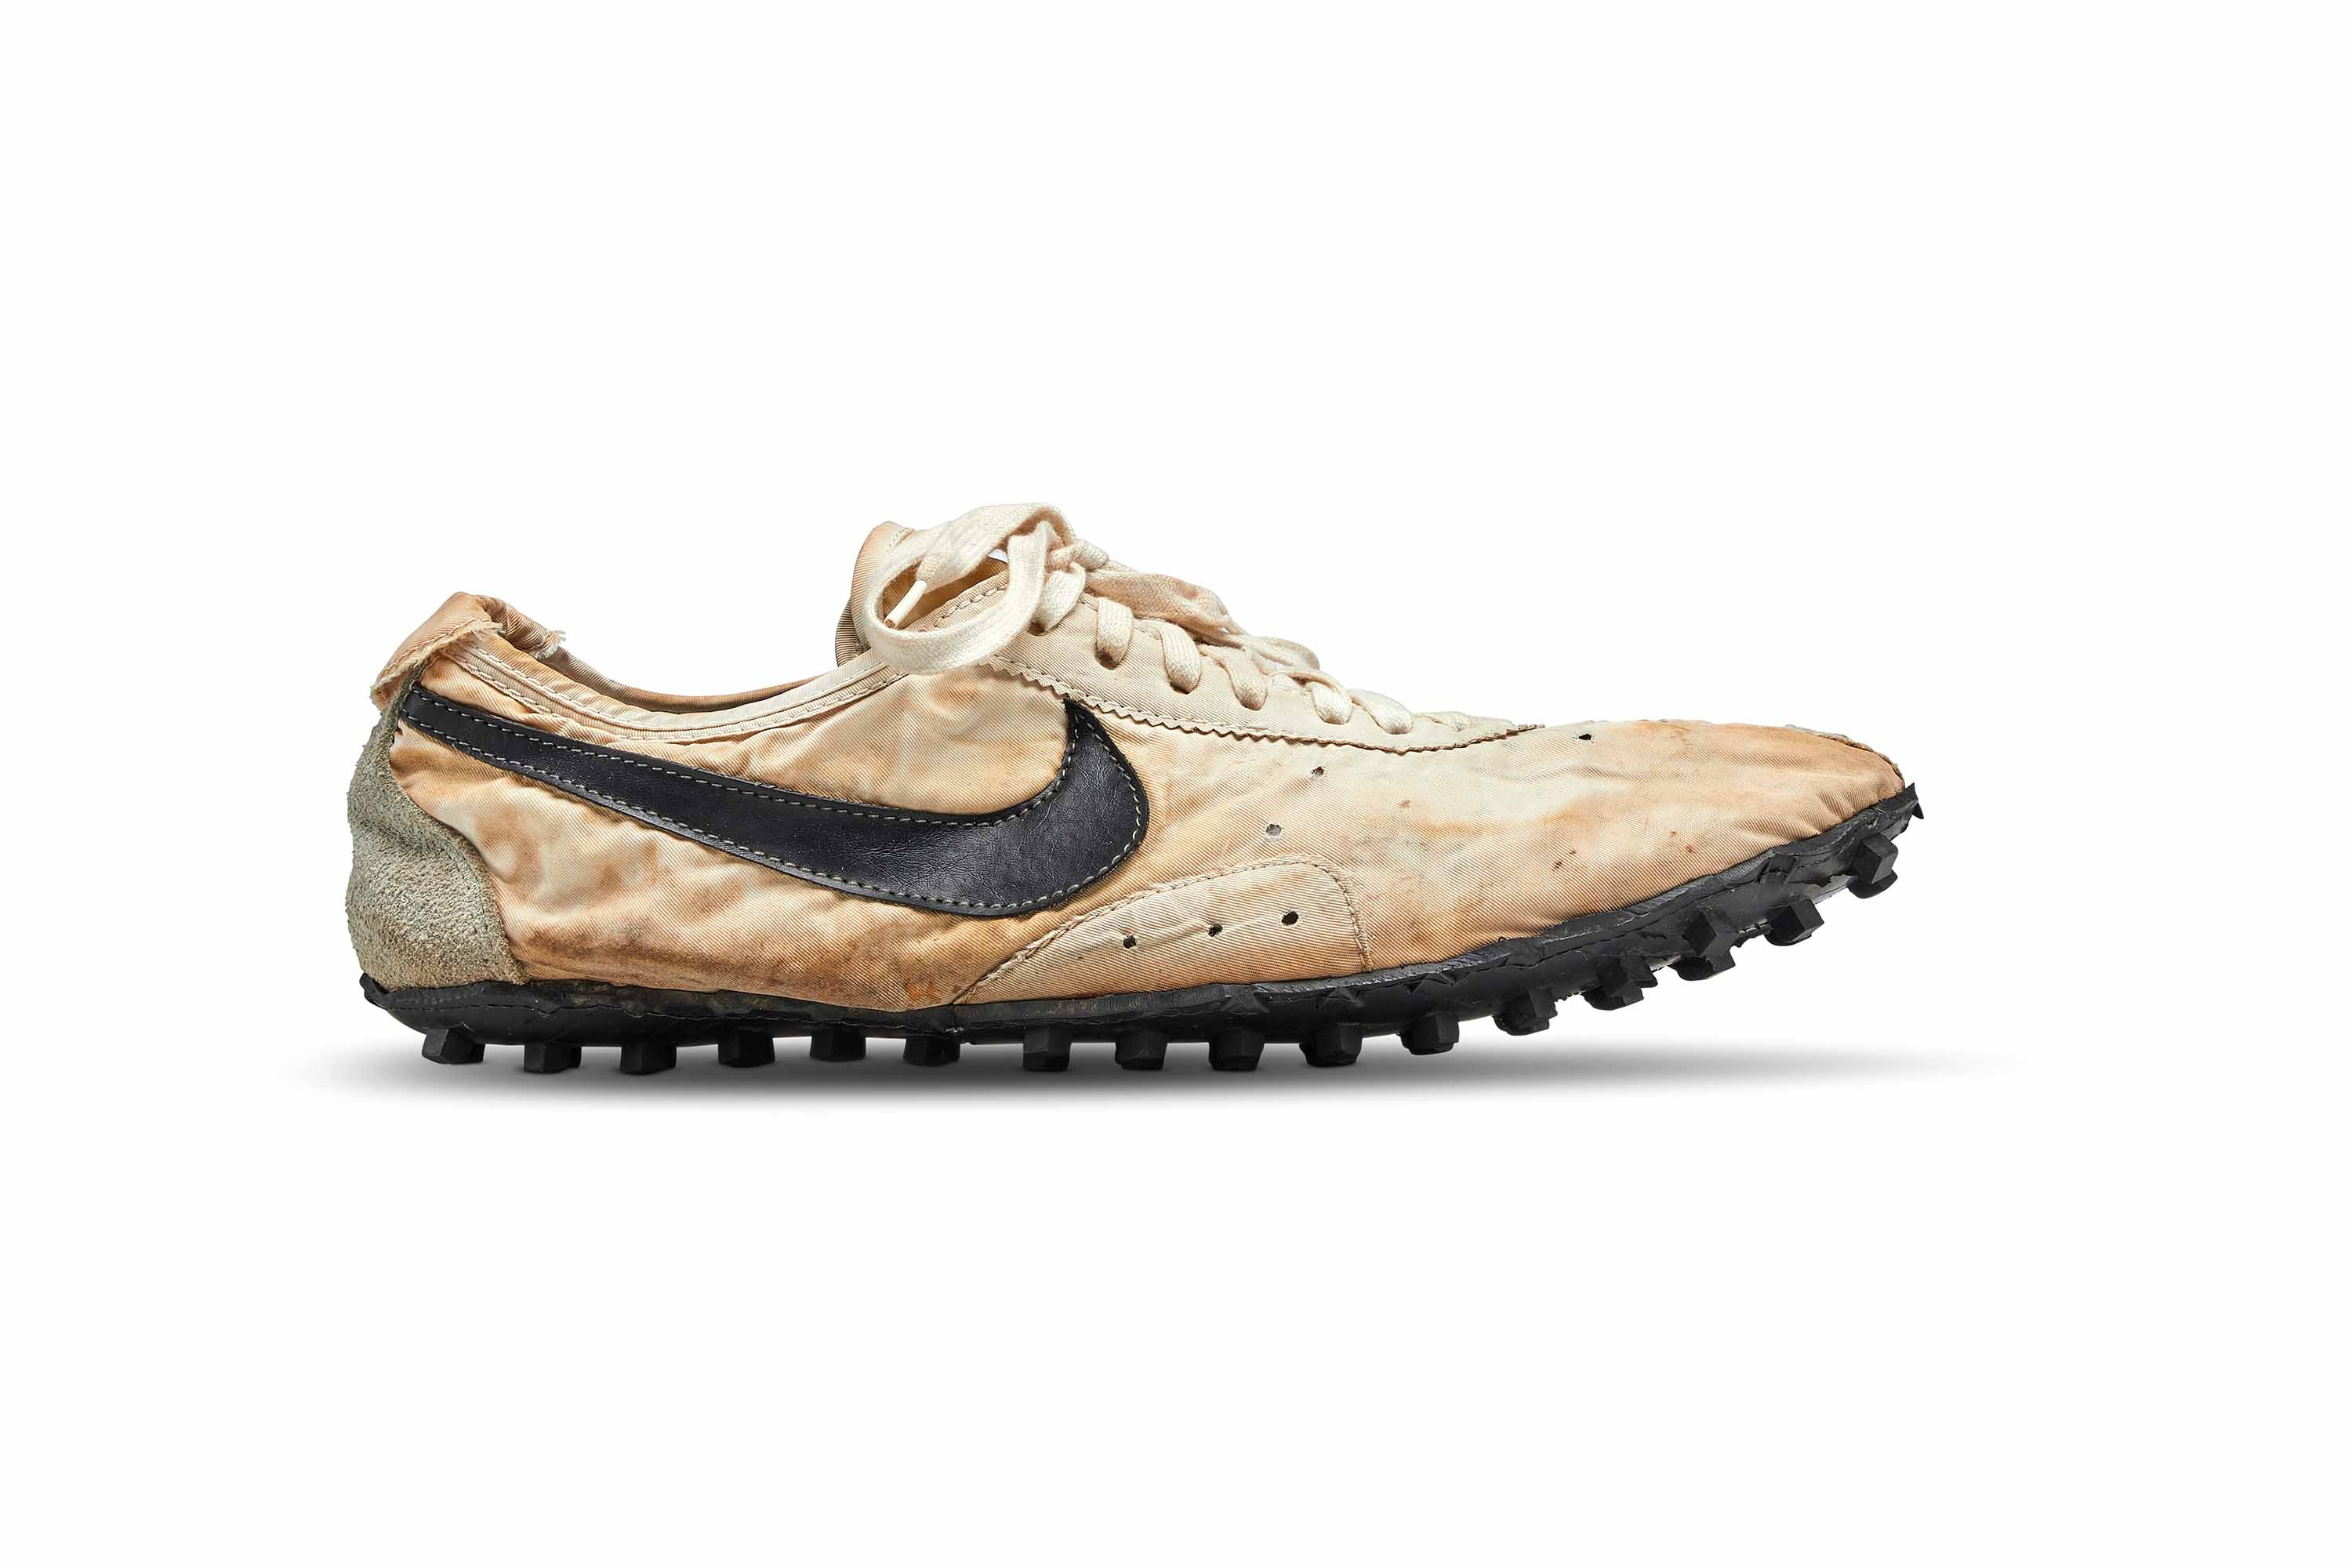 madre Nunca Neuropatía Nike's rare 'Moon Shoe' is sold for $437,500, shattering the auction record  for sneakers | CNN